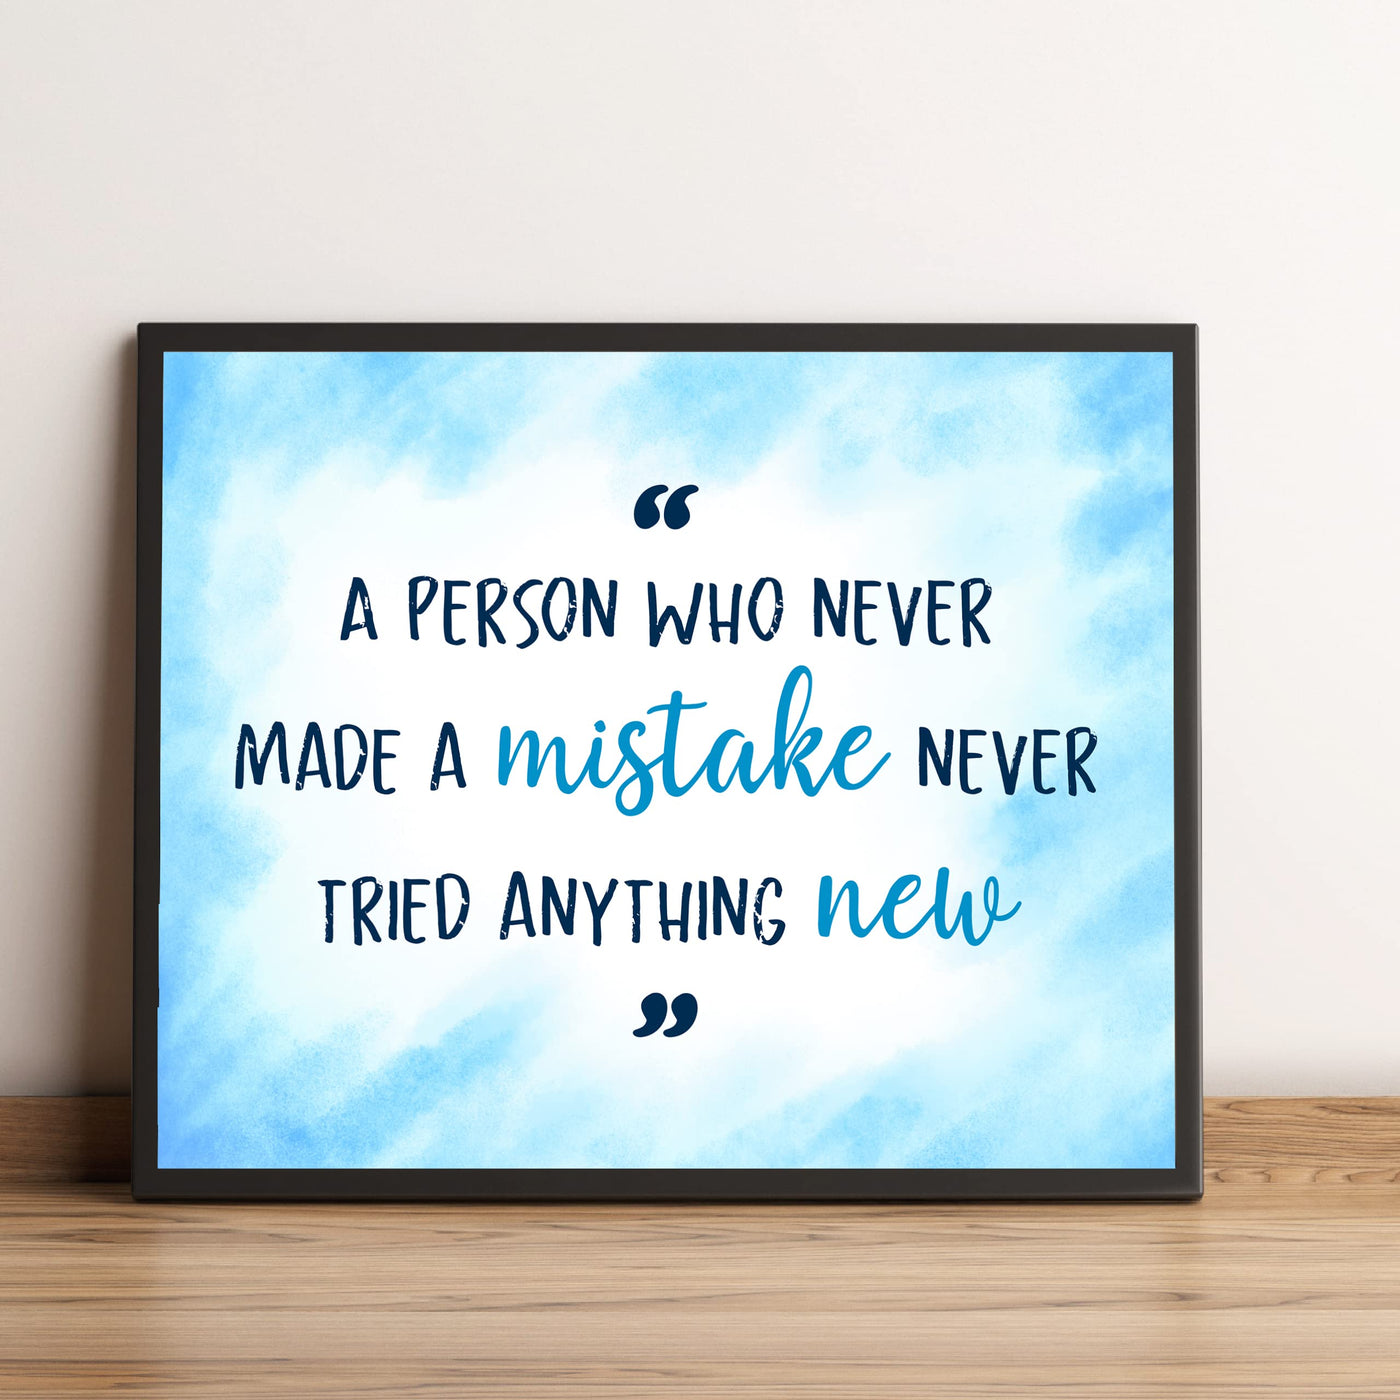 A Person Who Never Made a Mistake Motivational Wall Art Decor -10 x 8" Inspirational Typography Print -Ready to Frame. Perfect Decoration for Home-Office-Work-Classroom. Great Gift of Motivation!